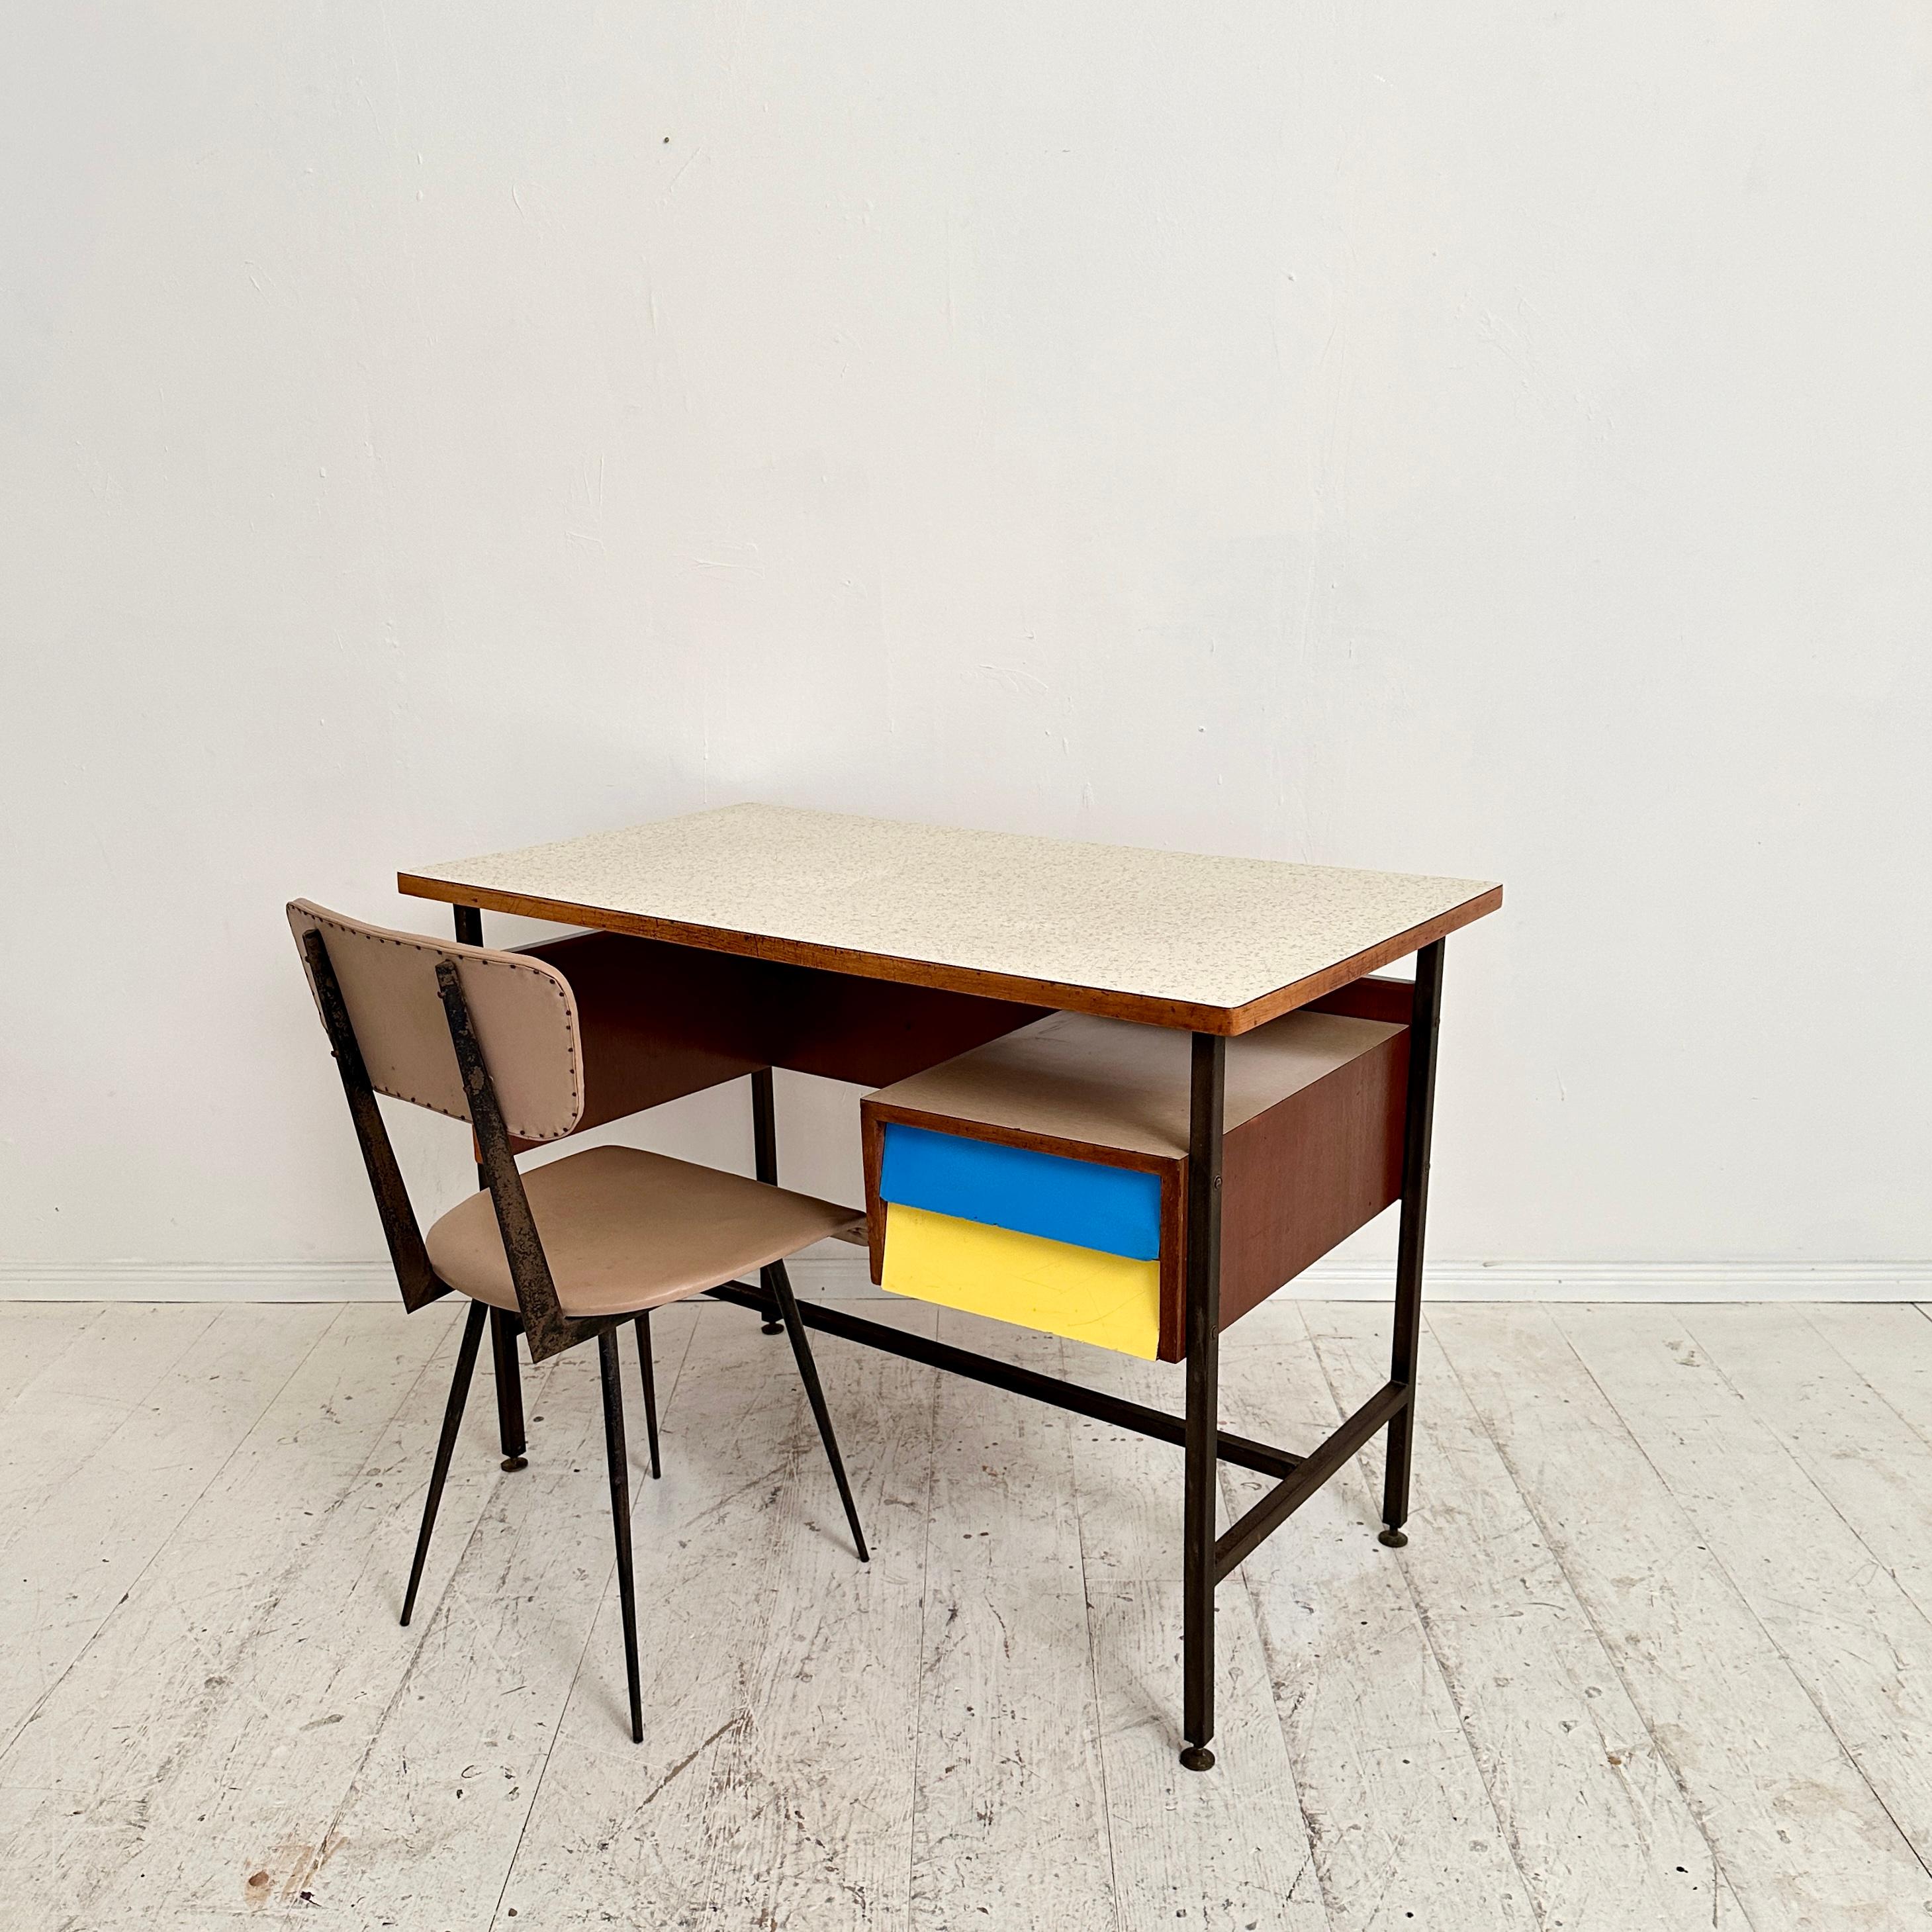 Small Mid Century Italian Desk in Metal, Walnut and Formica, around 1950 For Sale 6